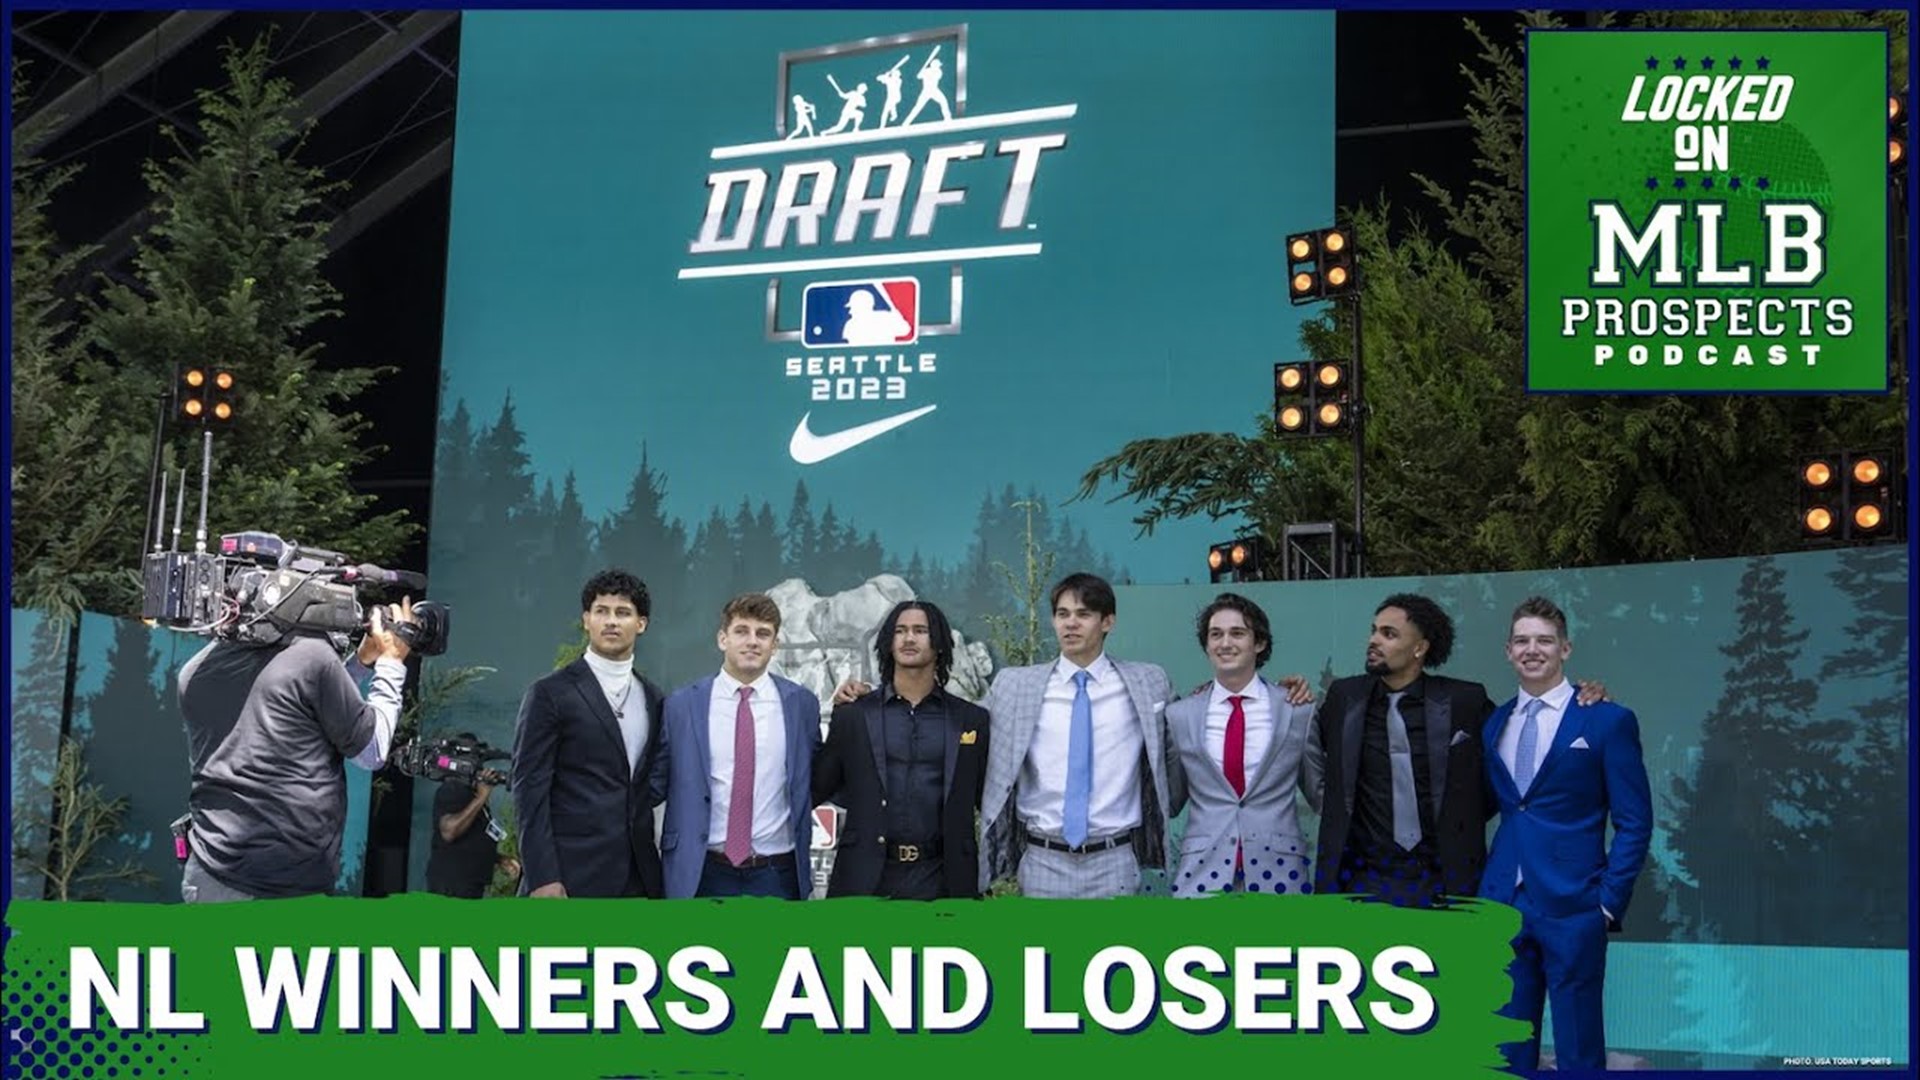 MLB DRAFT: In the National League, who won in each division on draft day?, MLB Prospects Podcast